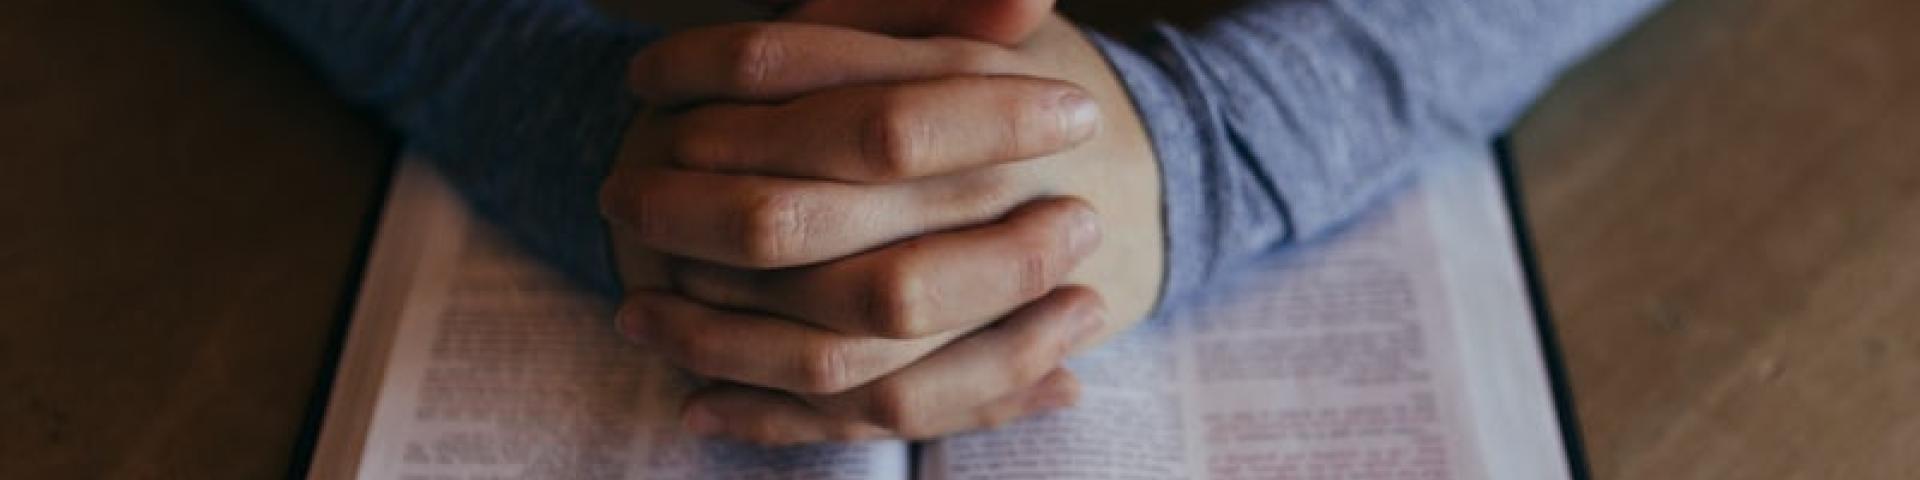 A person's hands folded in prayer on top of a bible